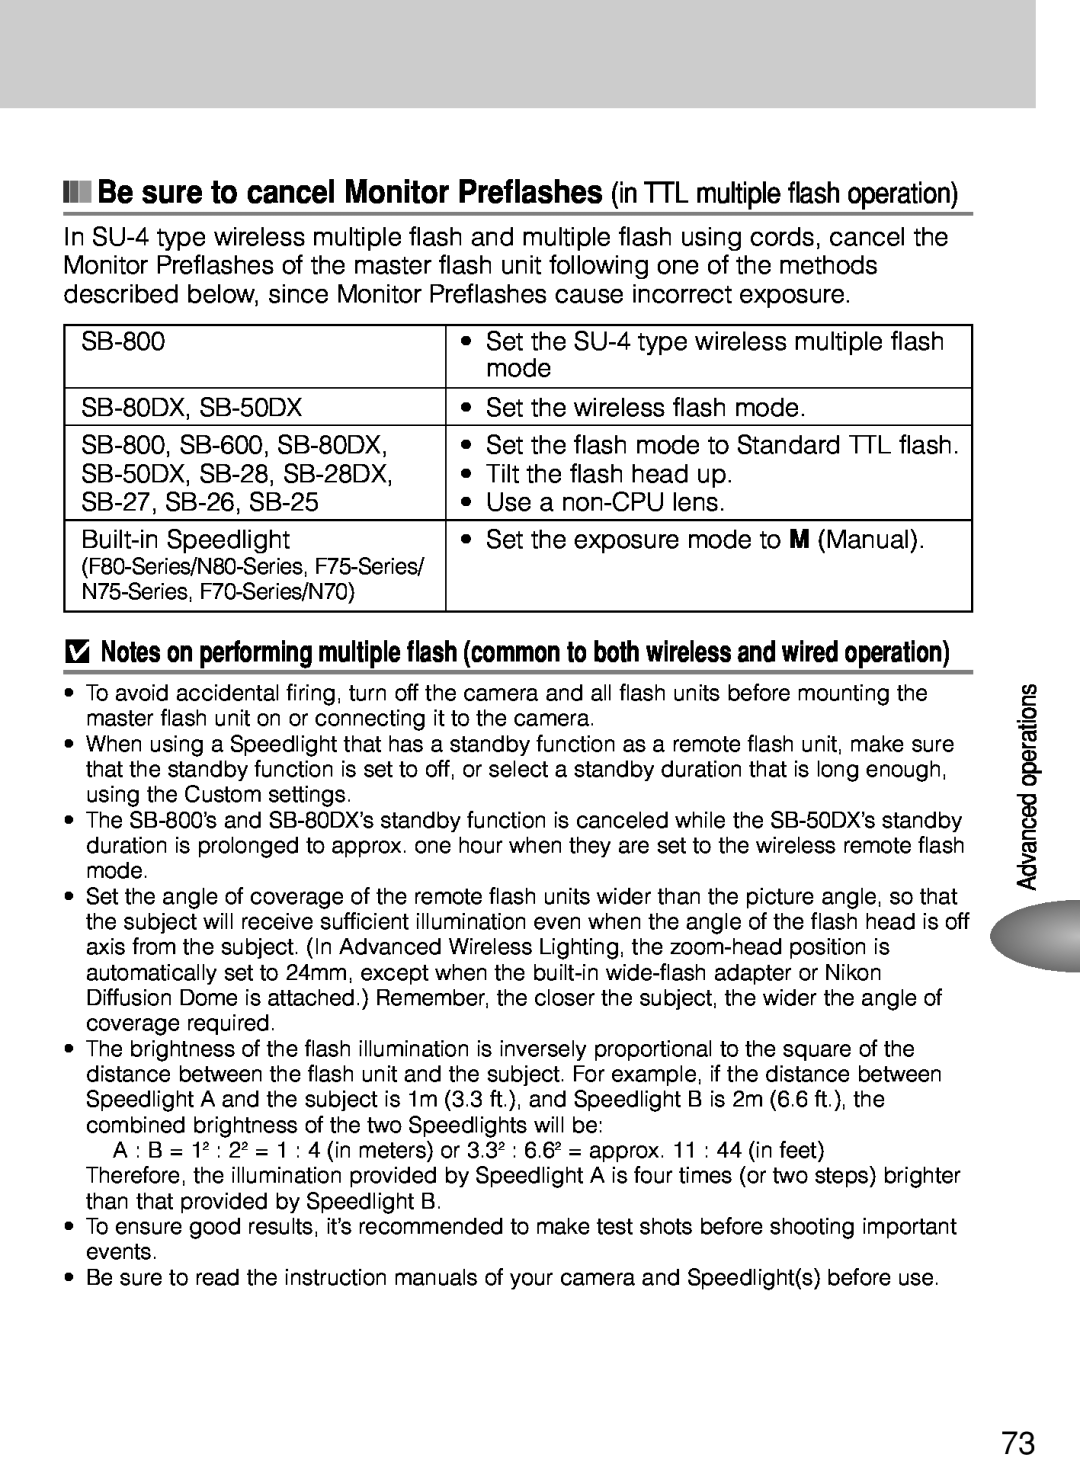 Nikon SB-800 instruction manual Be sure to cancel Monitor Preflashes in TTL multiple flash operation 